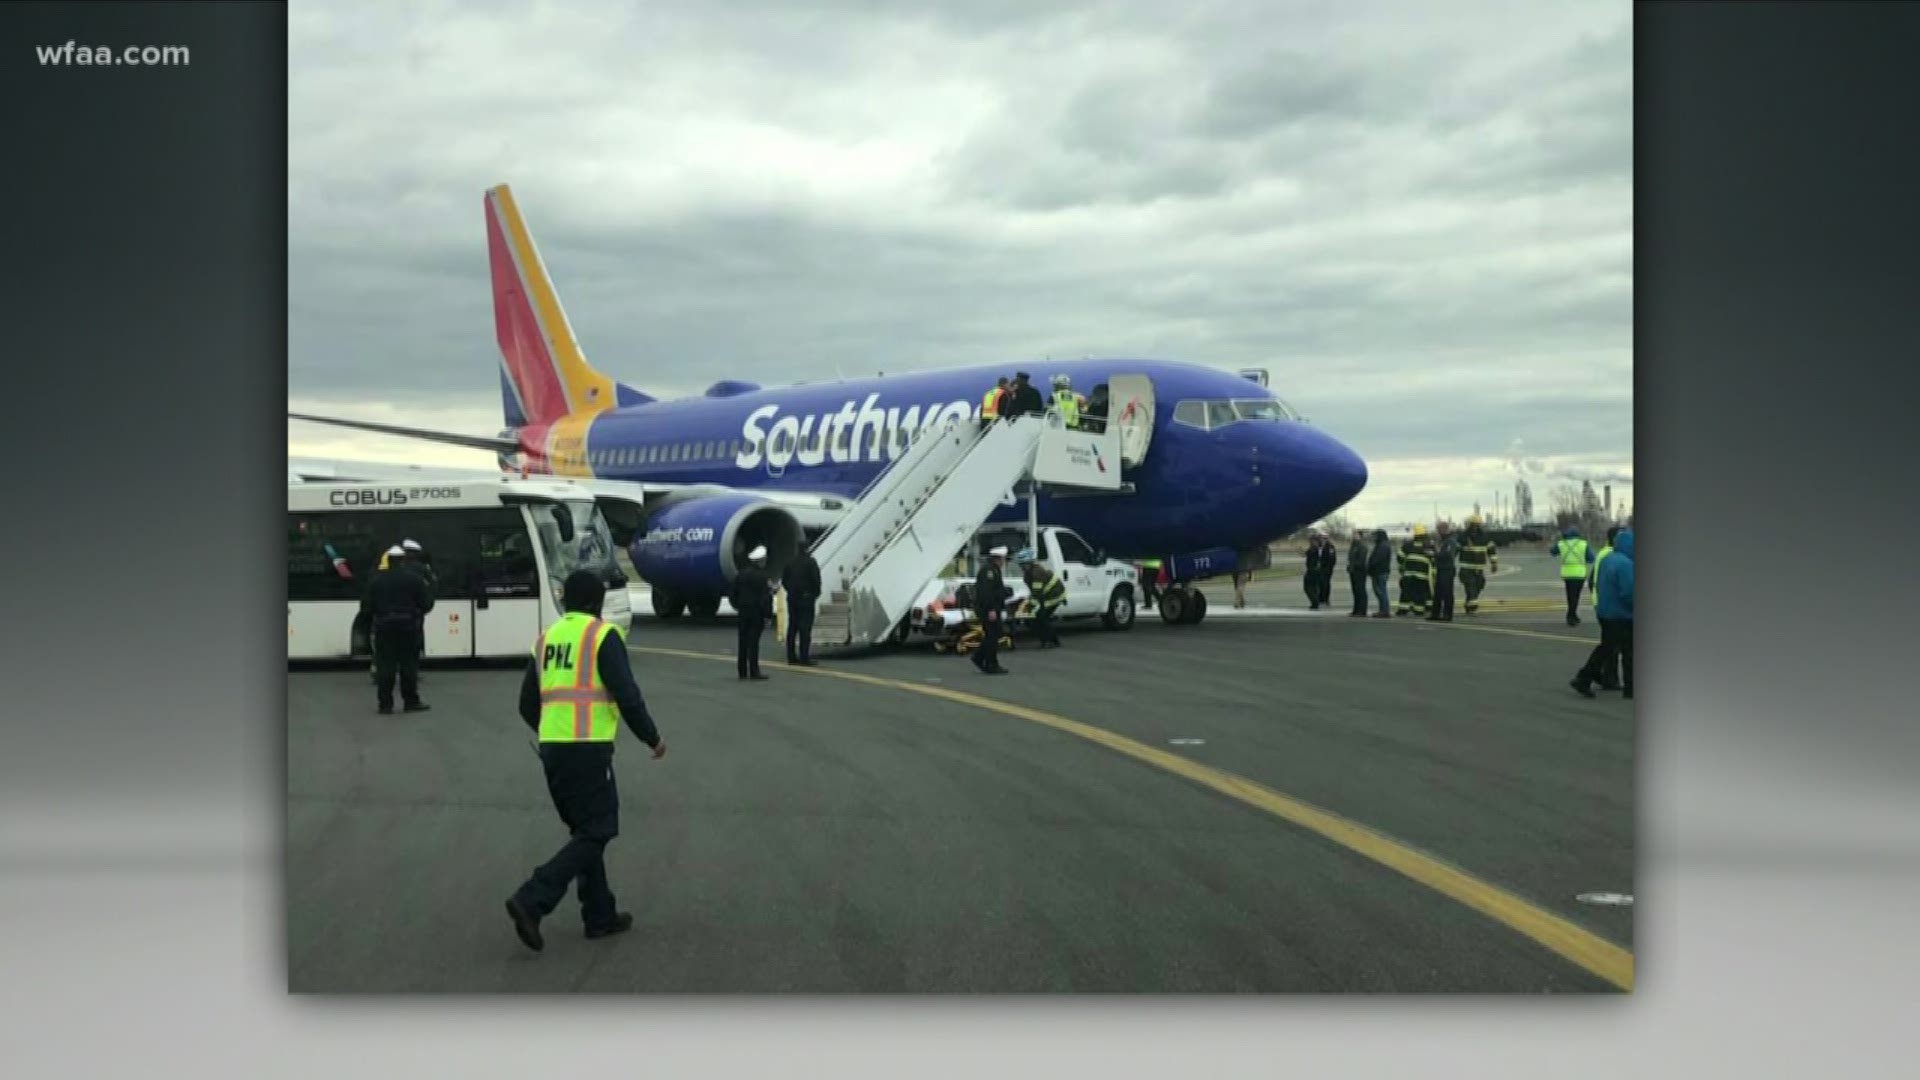 Context on the Dallas bound Southwest Airlines flight that made an emergency landing at Philadelphia airport